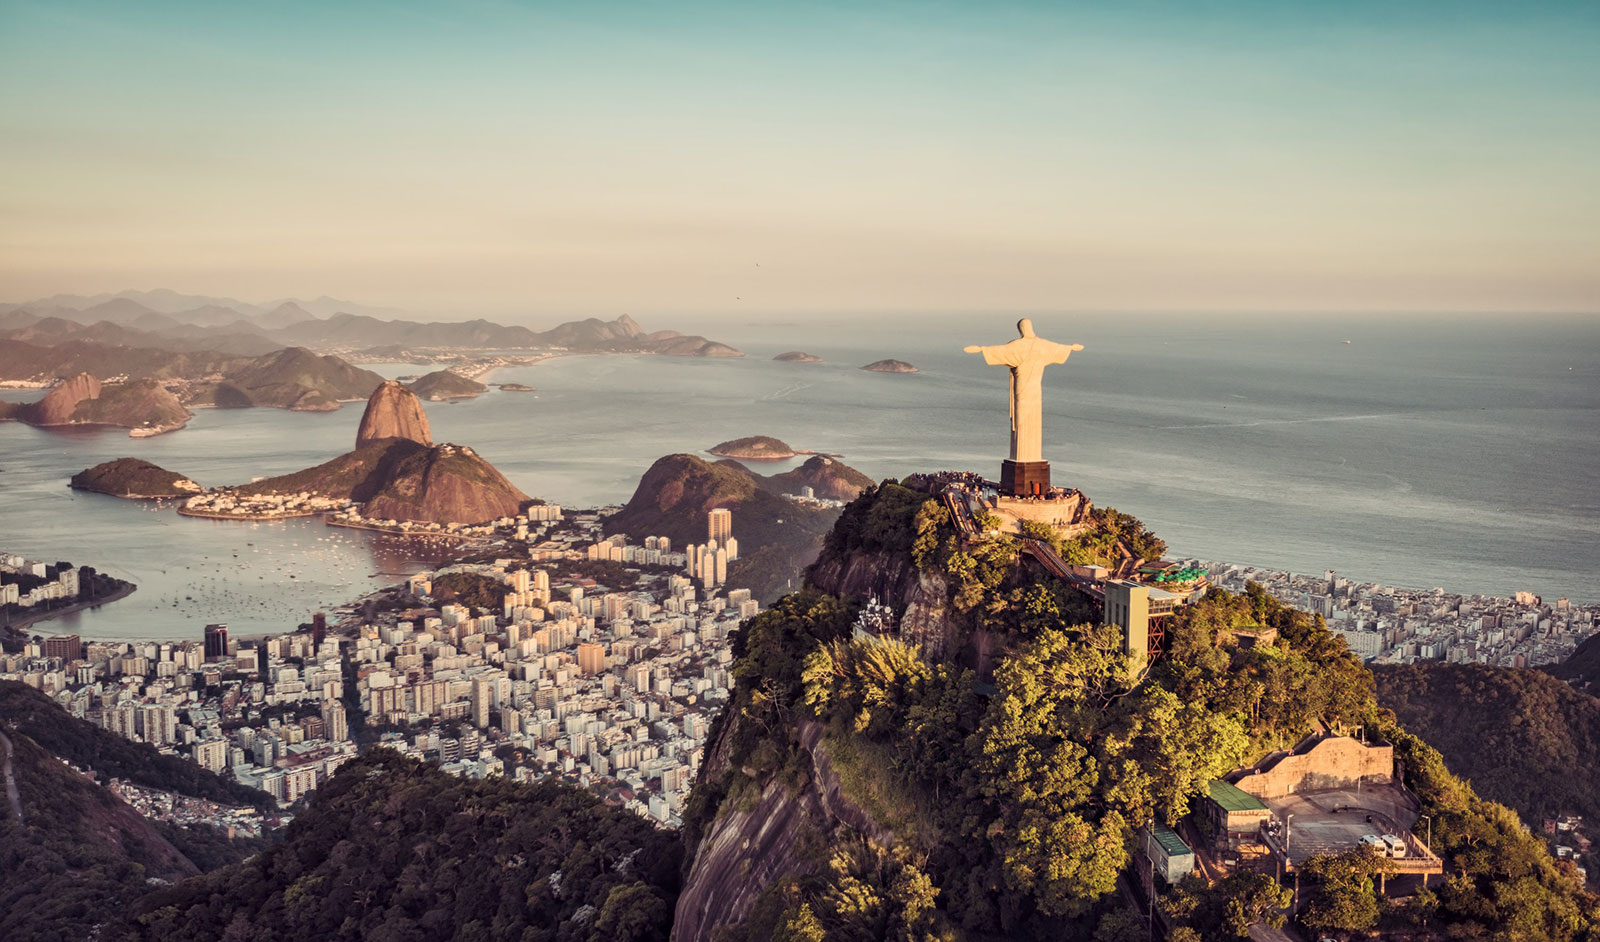 Anyone With the Most Basic Geographic Knowledge Should Get 19/26 on This Quiz Brazil